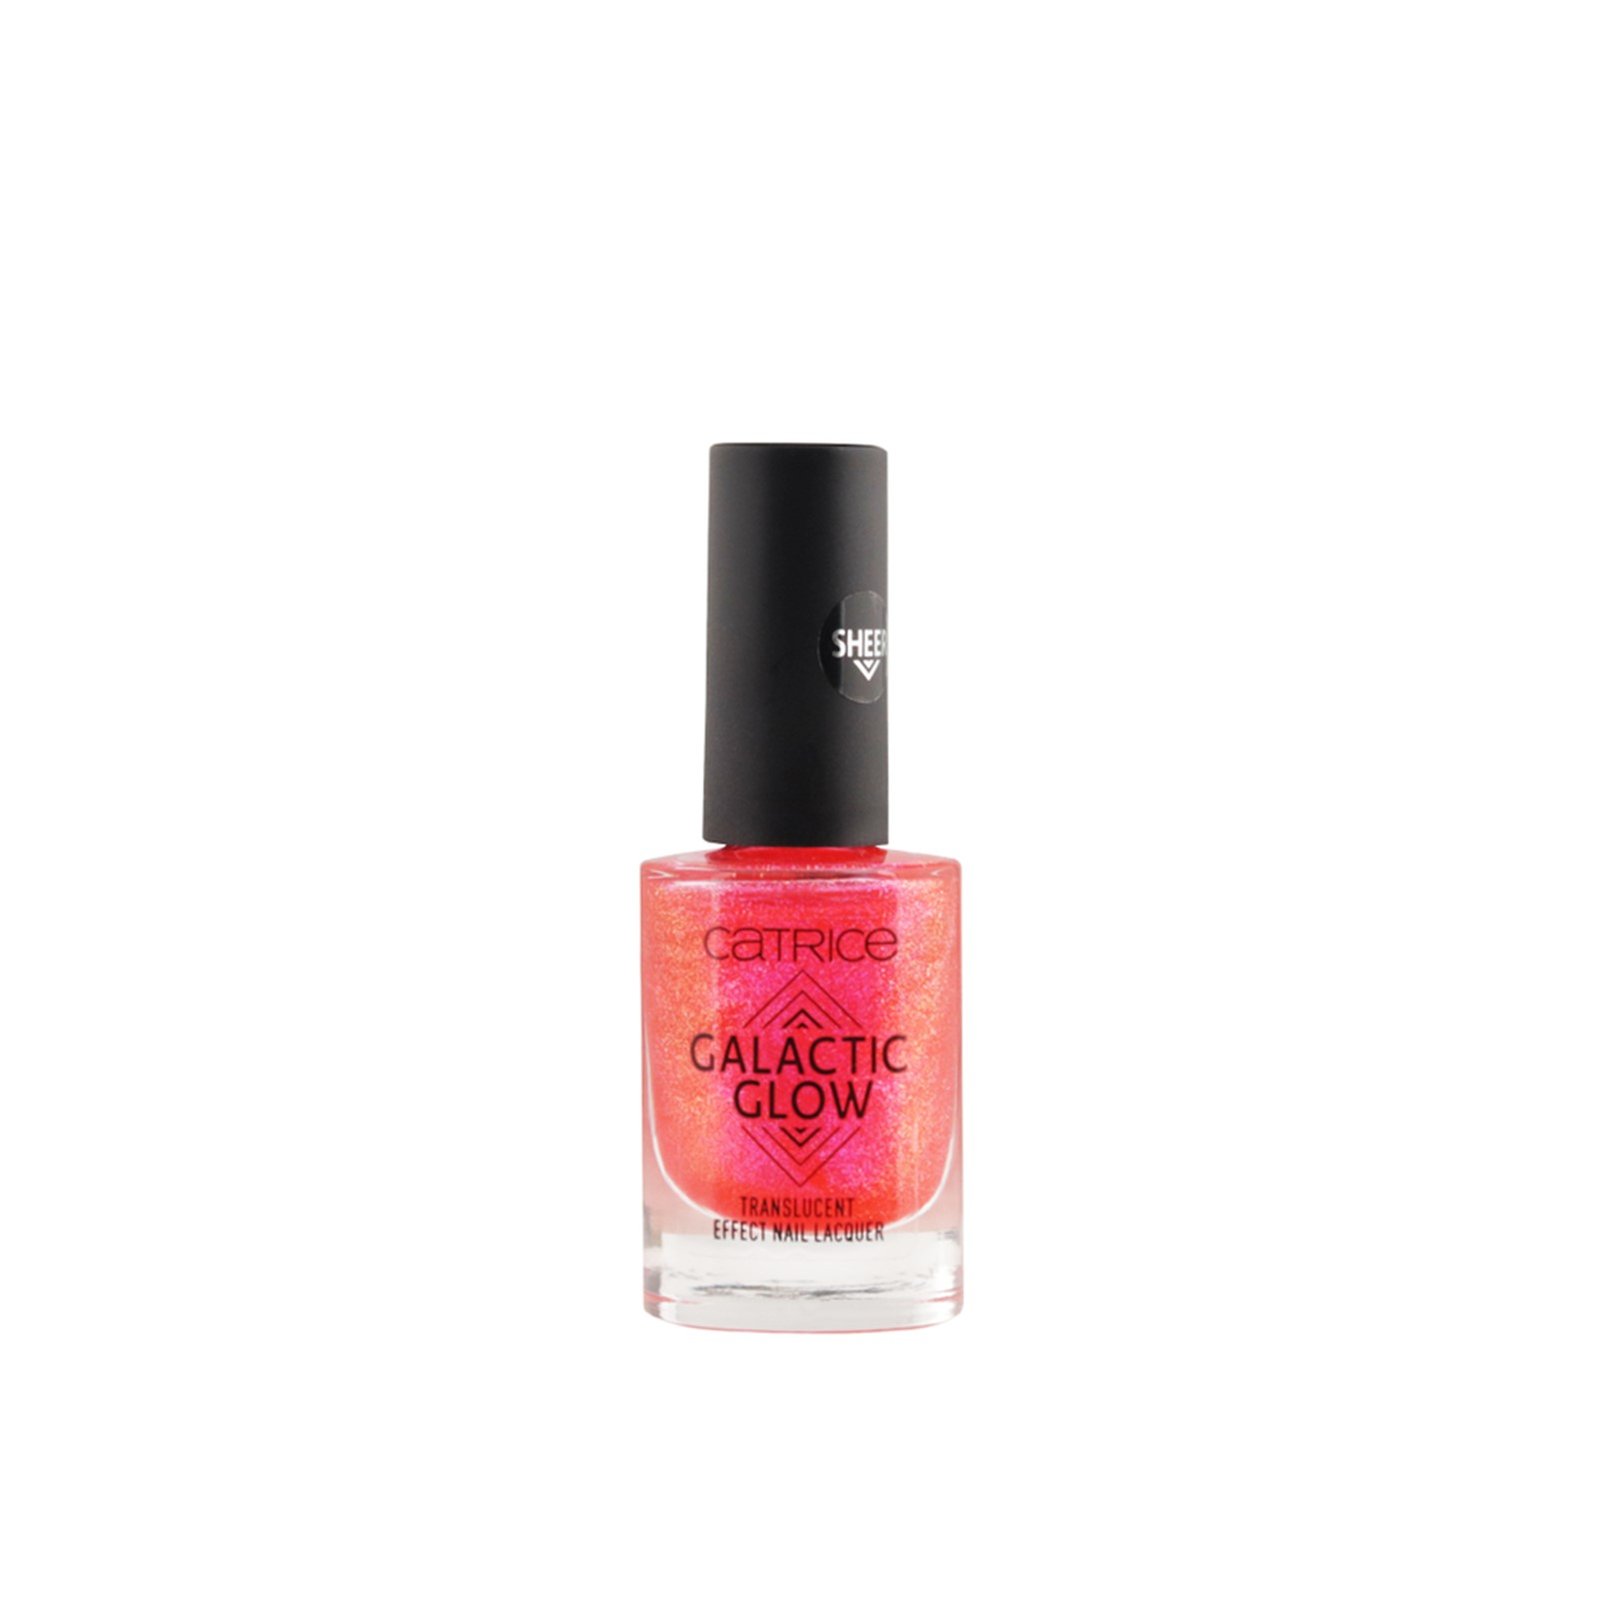 Catrice Galactic Glow Translucent Effect Nail Lacquer 05 Watch Out! Universe Blaze 8ml